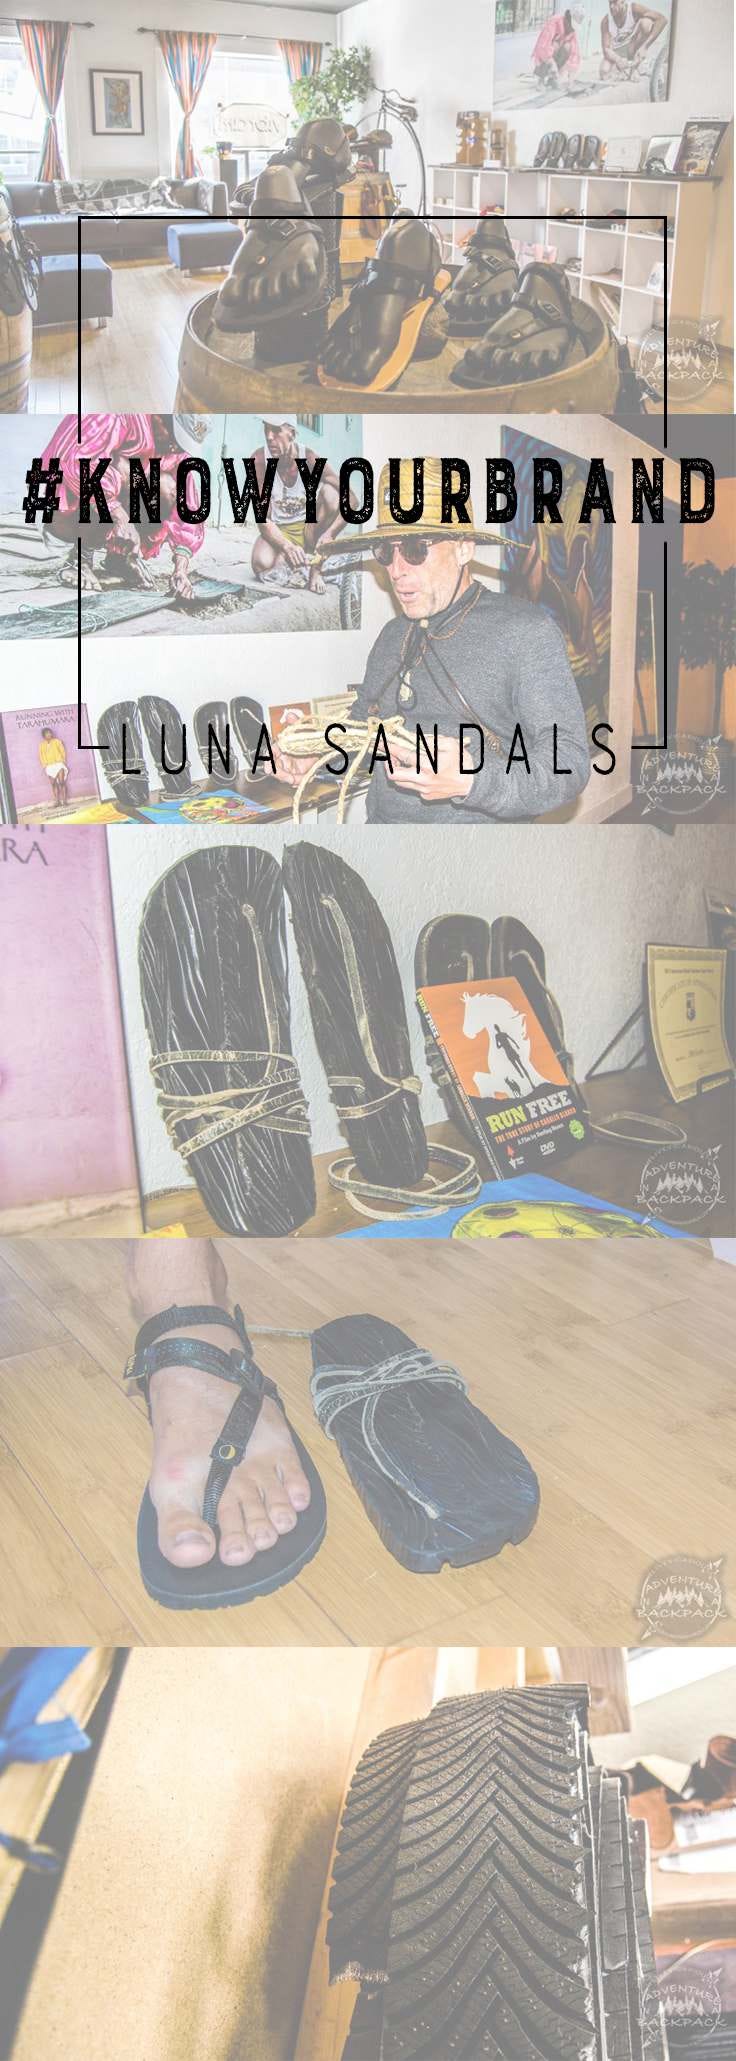 Could human movement be considered eco-friendly?  Sure!  See why in our #knowyourbrand episode over luna sandals. Luna Sandals Running | Barefoot Running | Luna Sandals Barefoot | Luna Mono | Hiking Sandals | Minimalist Sandals | Outdoor Gear